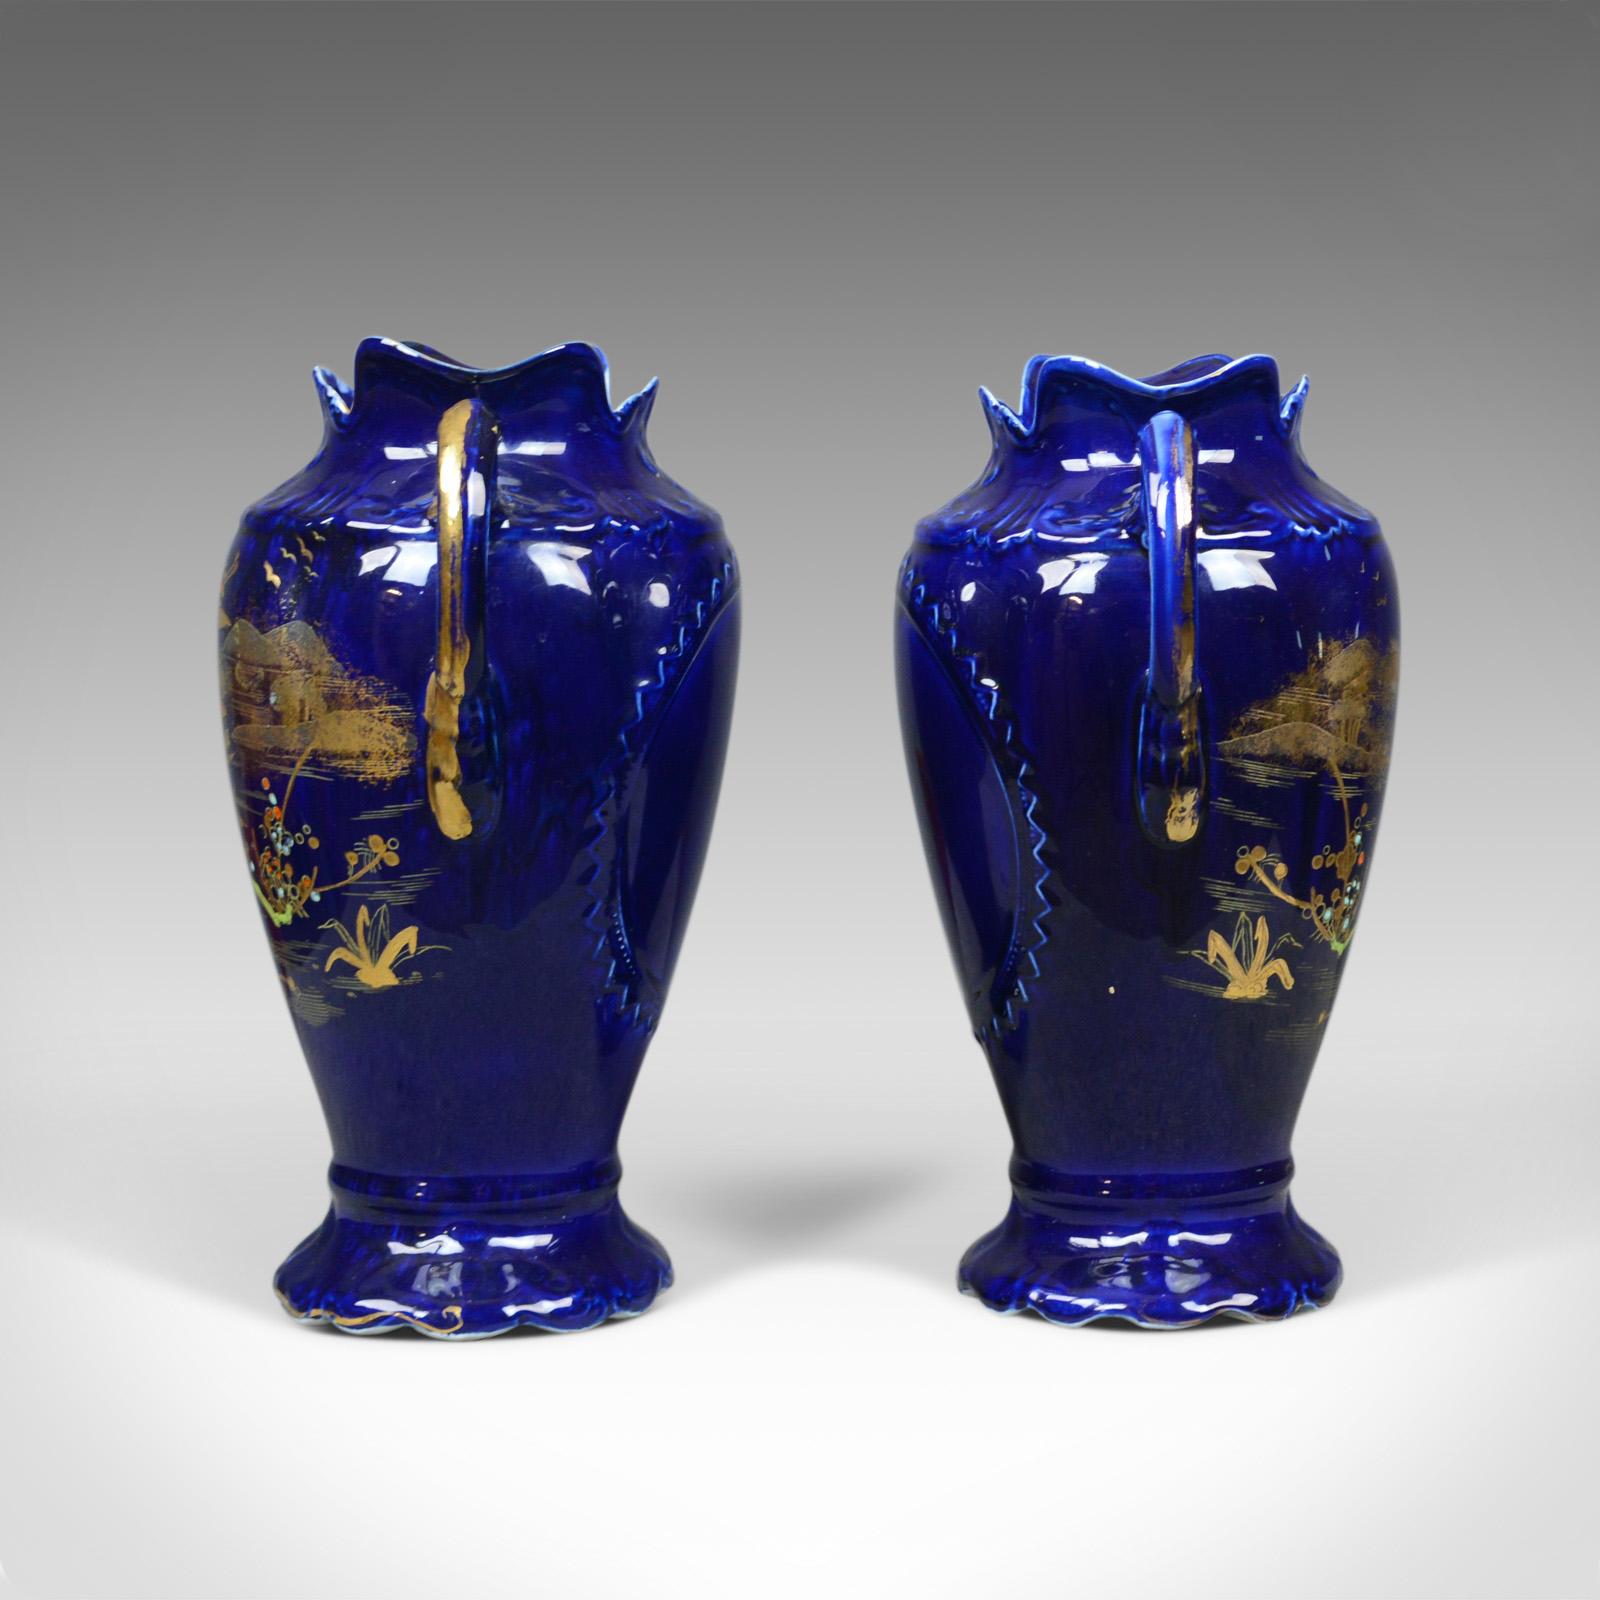 This is a pair of decorative baluster vases, ceramic urns in gold and blue, stamped England to the base, late 20th century.

Imposing, quality pair of ceramic vases 
Profusely decorated in gold on a deep blue ground
Free from any damage or